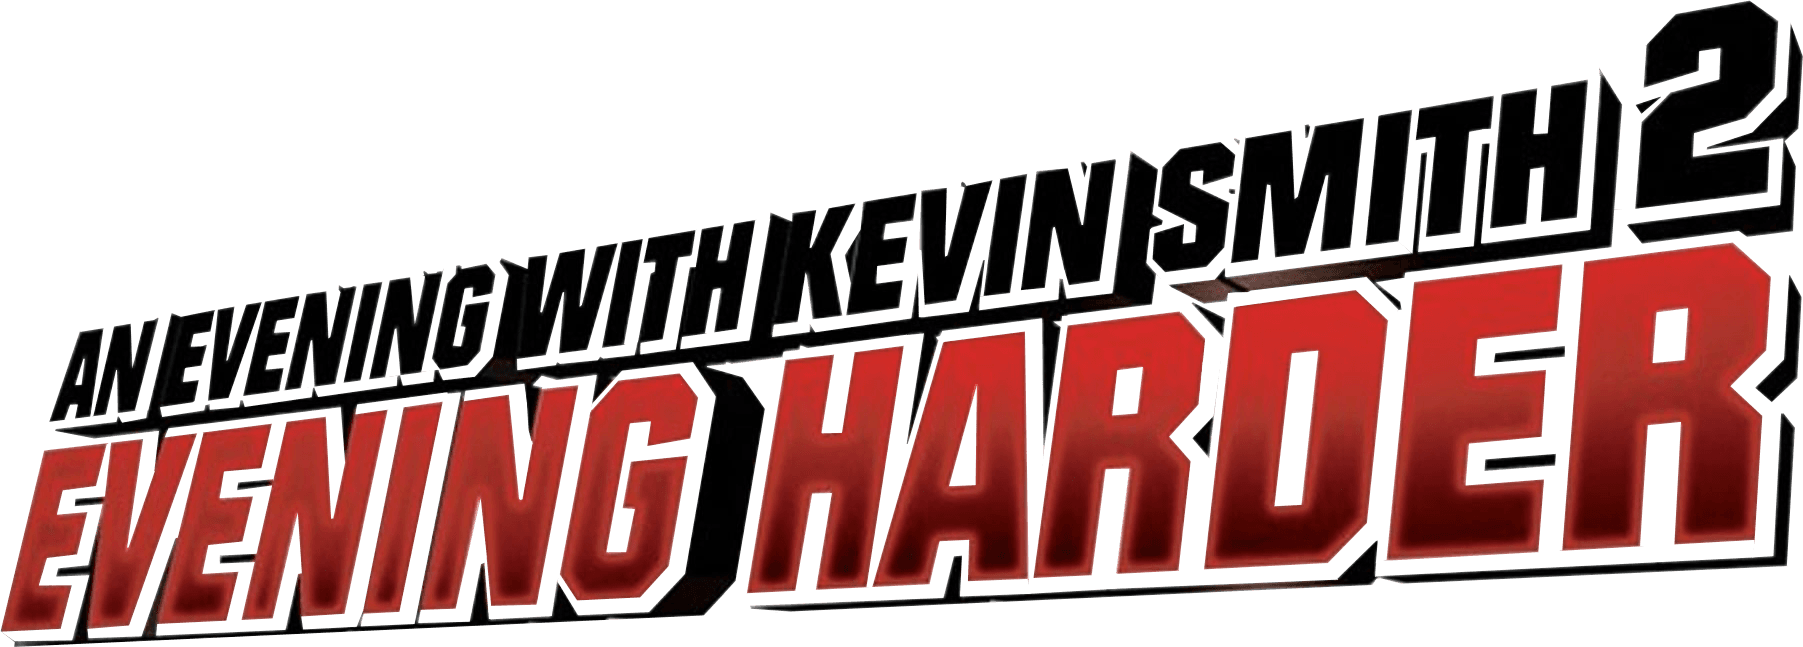 An Evening with Kevin Smith 2: Evening Harder logo